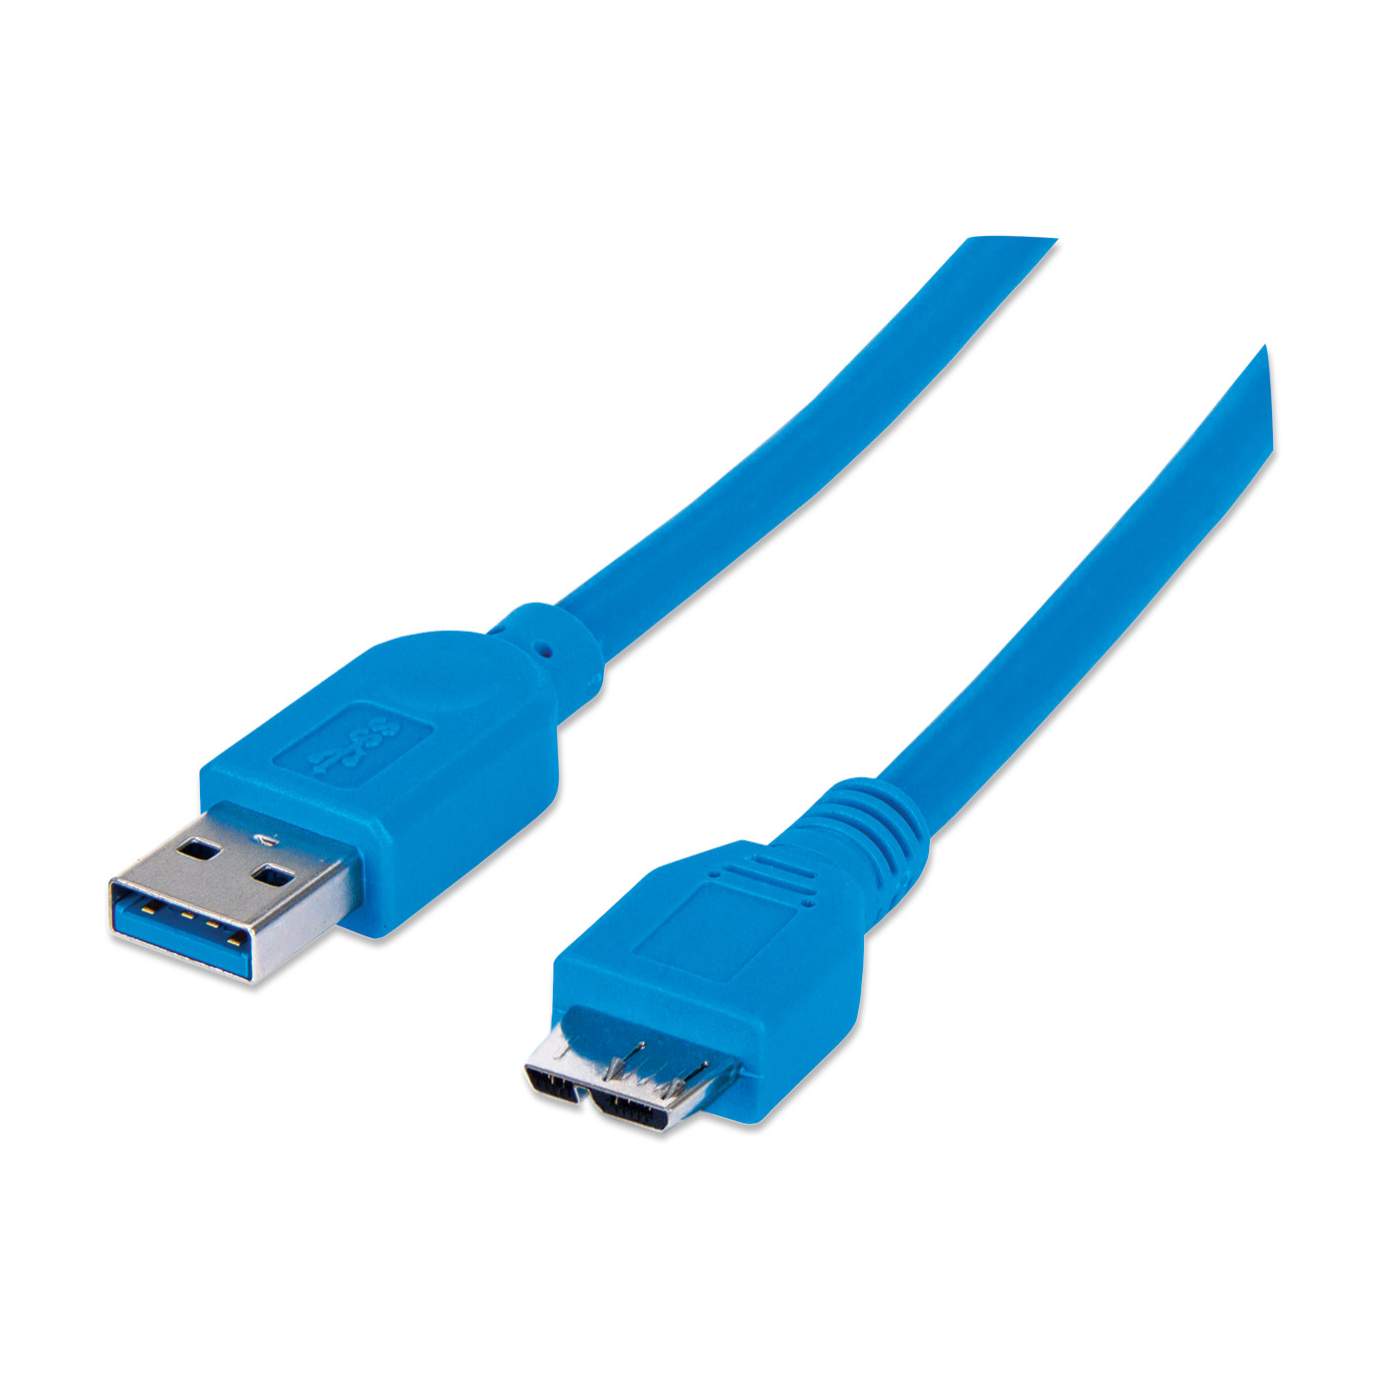 Manhattan USB 3.0 Type-A to Micro-USB Cable (325417)